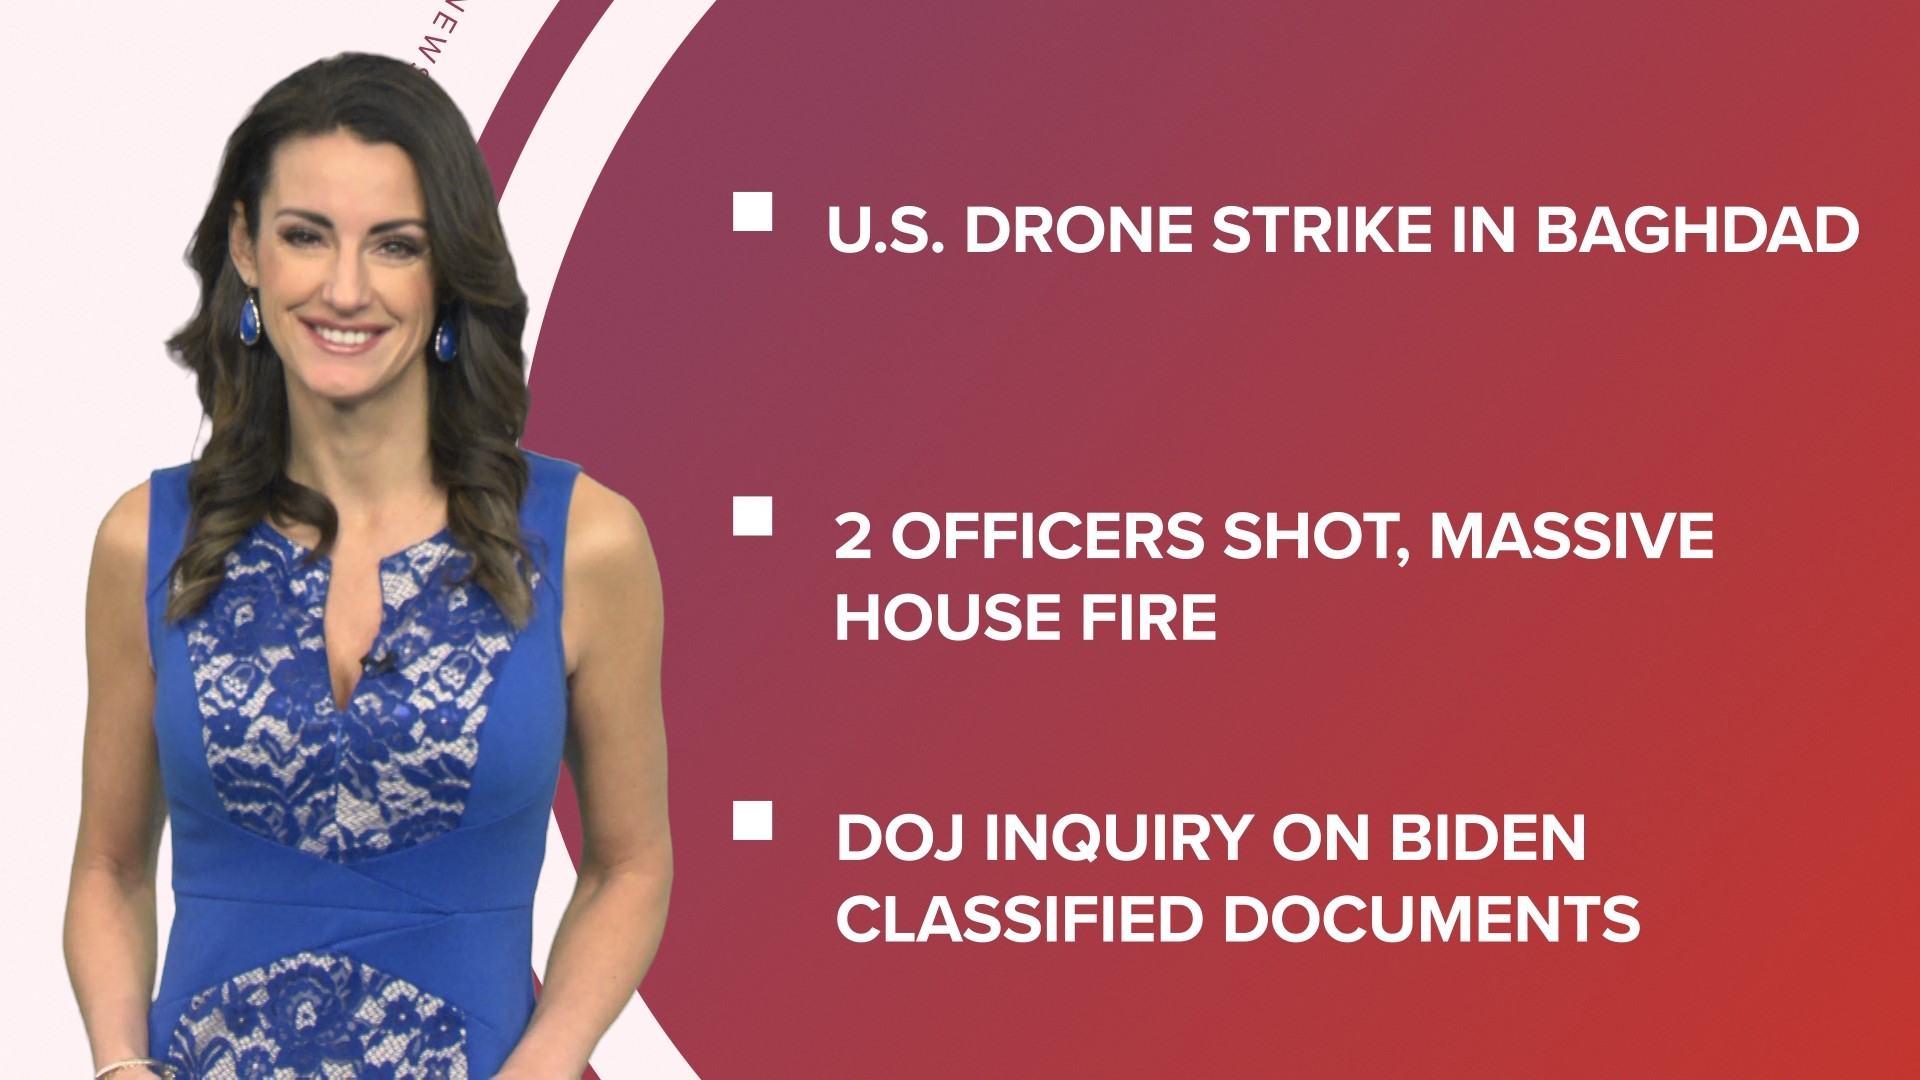 A look at what is happening in the news from the Dept. of Justice preparing to release a report on classified documents and President Biden to a new 'Moana' movie.